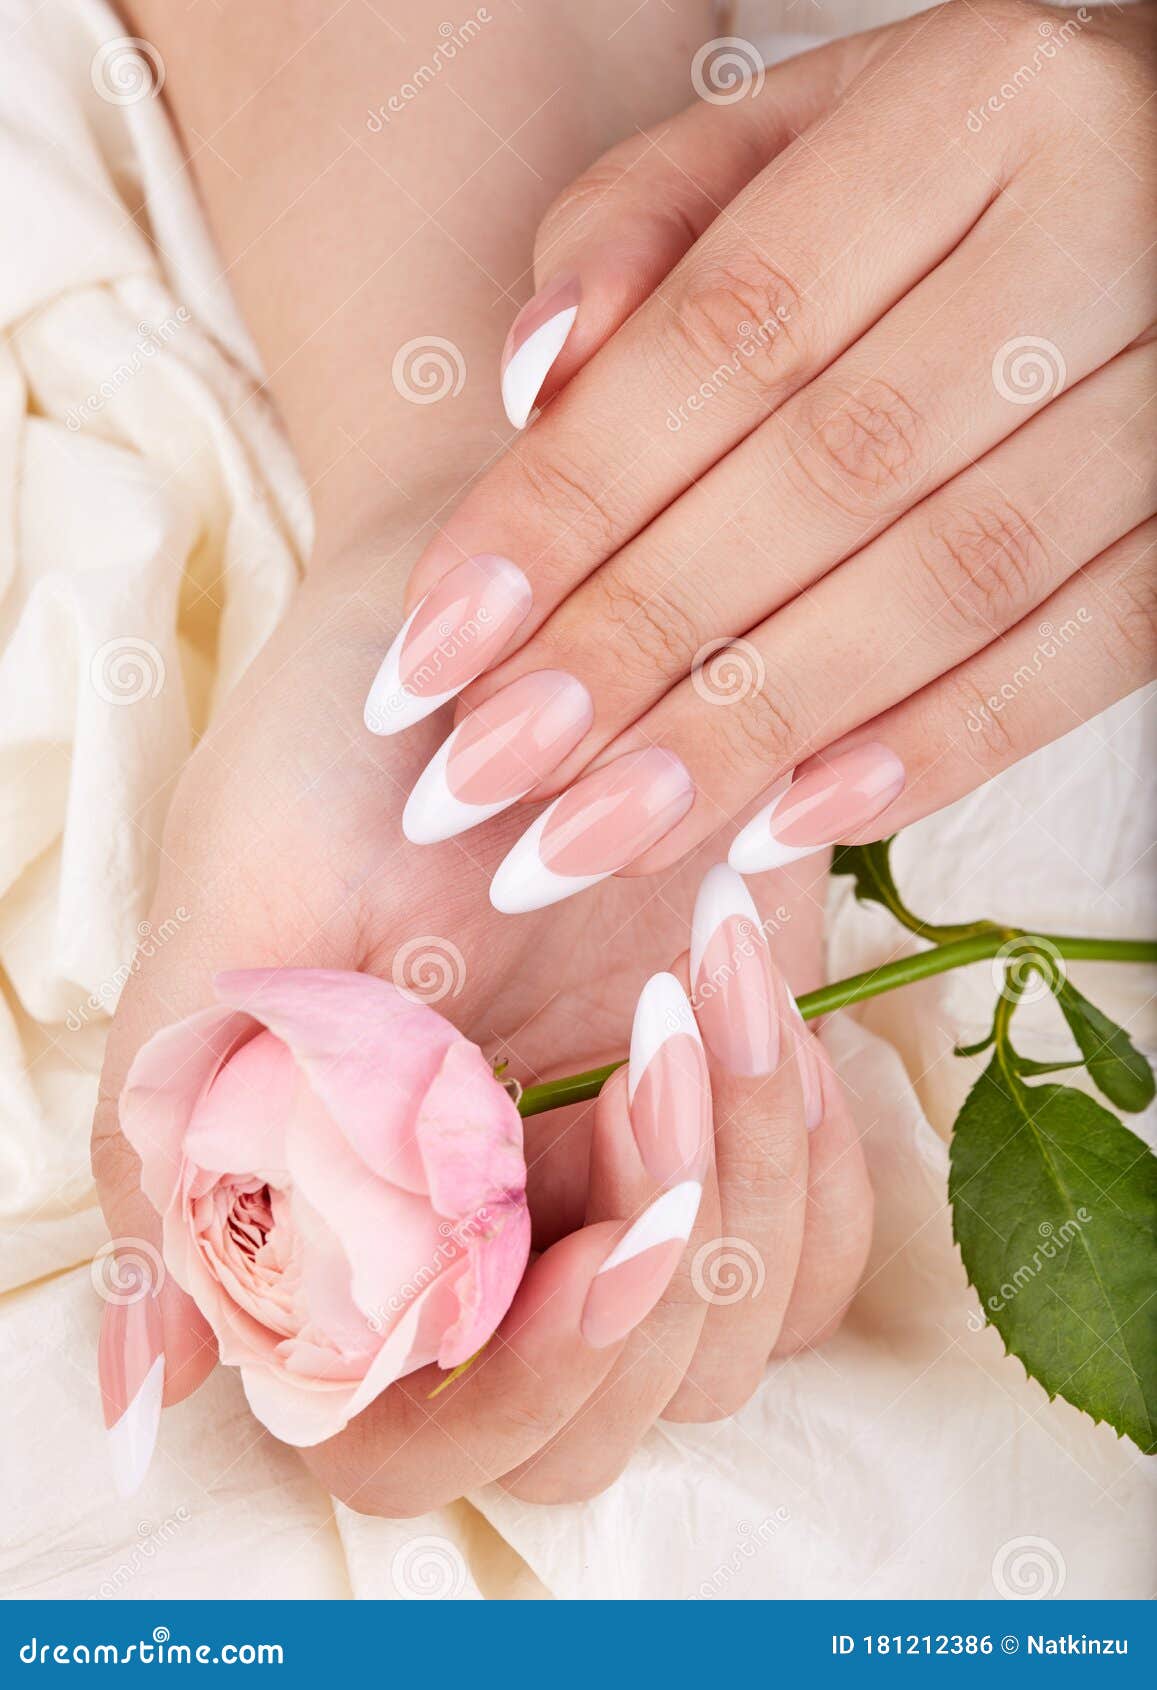 hands with long artificial french manicured nails